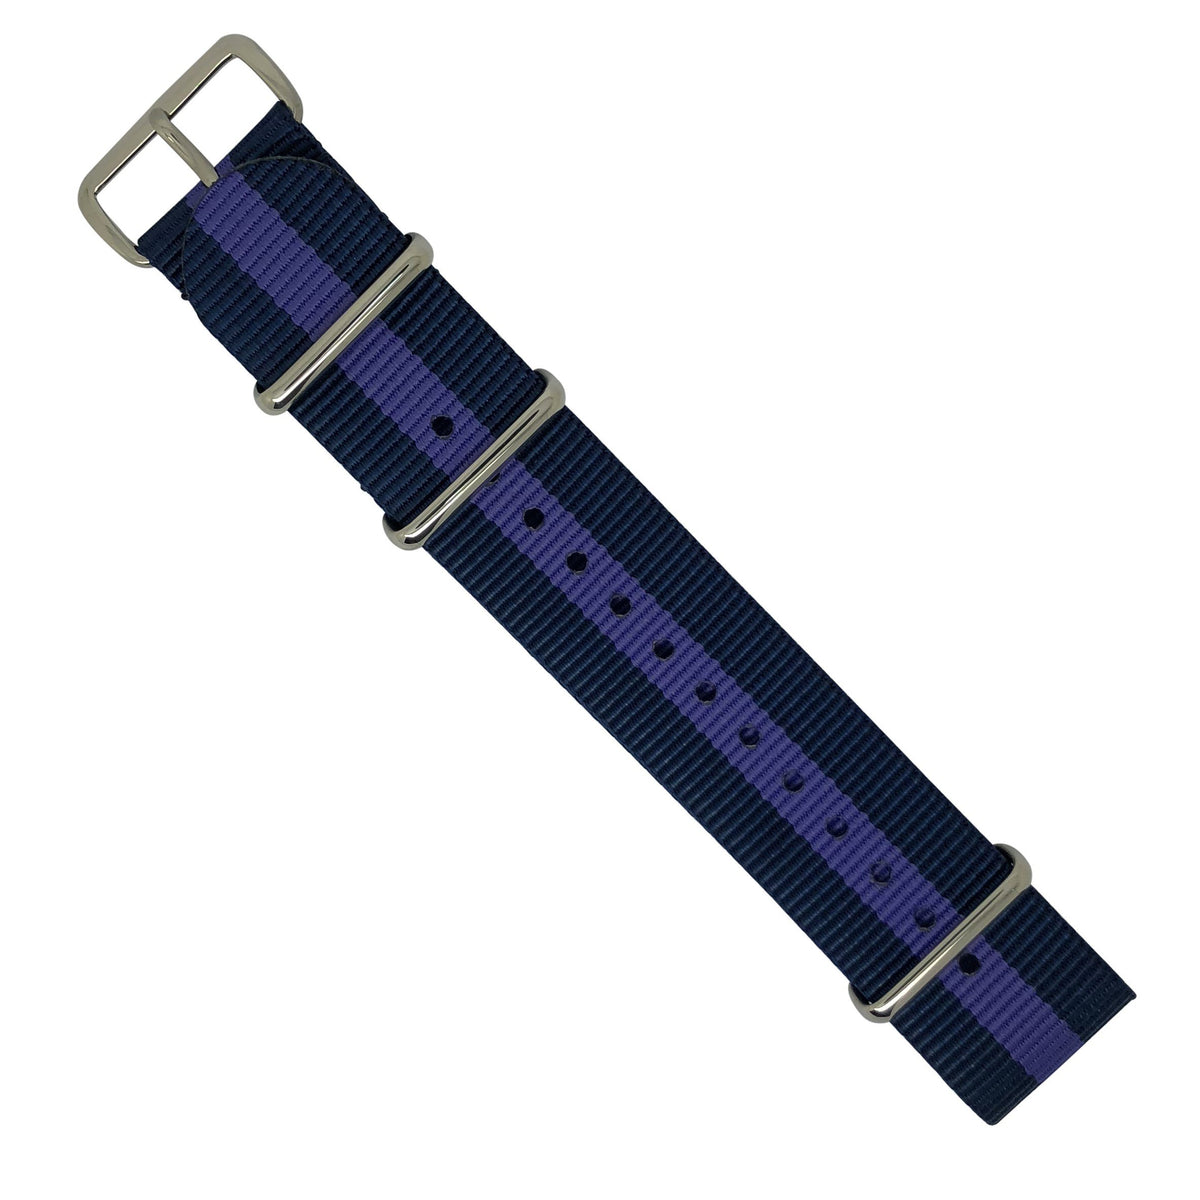 Premium Nato Strap in Navy Purple with Polished Silver Buckle (22mm) - Nomadstore Singapore